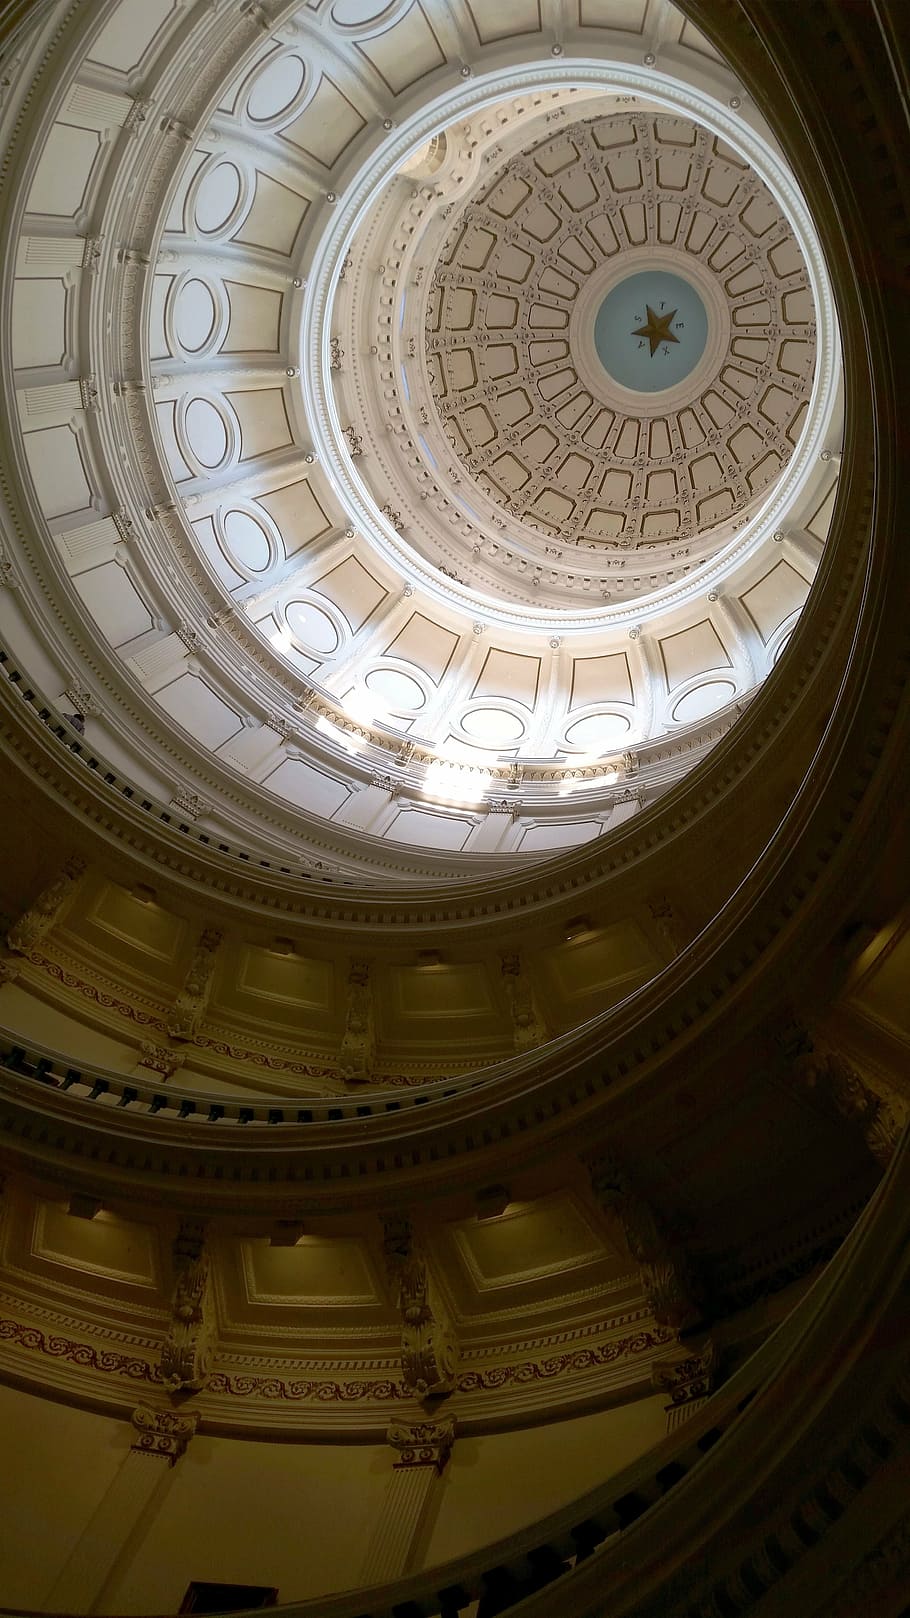 architecture, building, capitol hill austin tx, design, old, historical, monument, dome, indoors, state Capitol Building